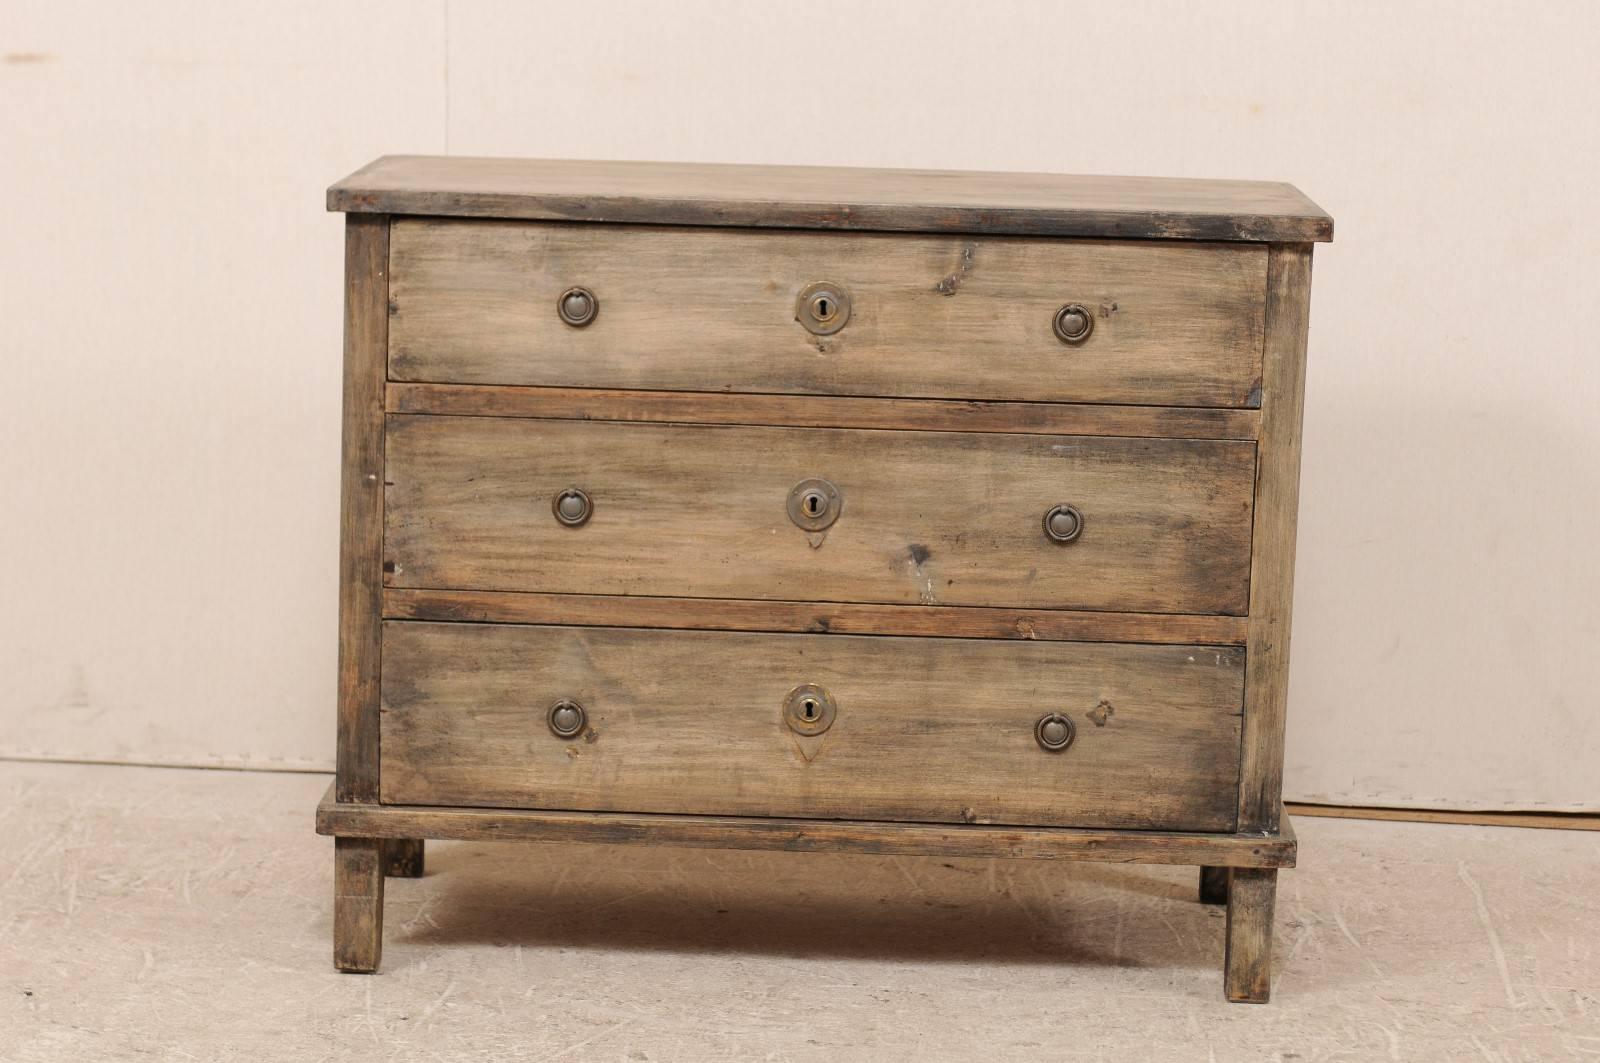 A Swedish, late 19th century wood chest. This Swedish three-drawer chest features nice clean lines, dovetail joins and is raised on tapered squared legs. The chest is washed in taupe, grey, black and warm brown tones. The drawers have circular mount